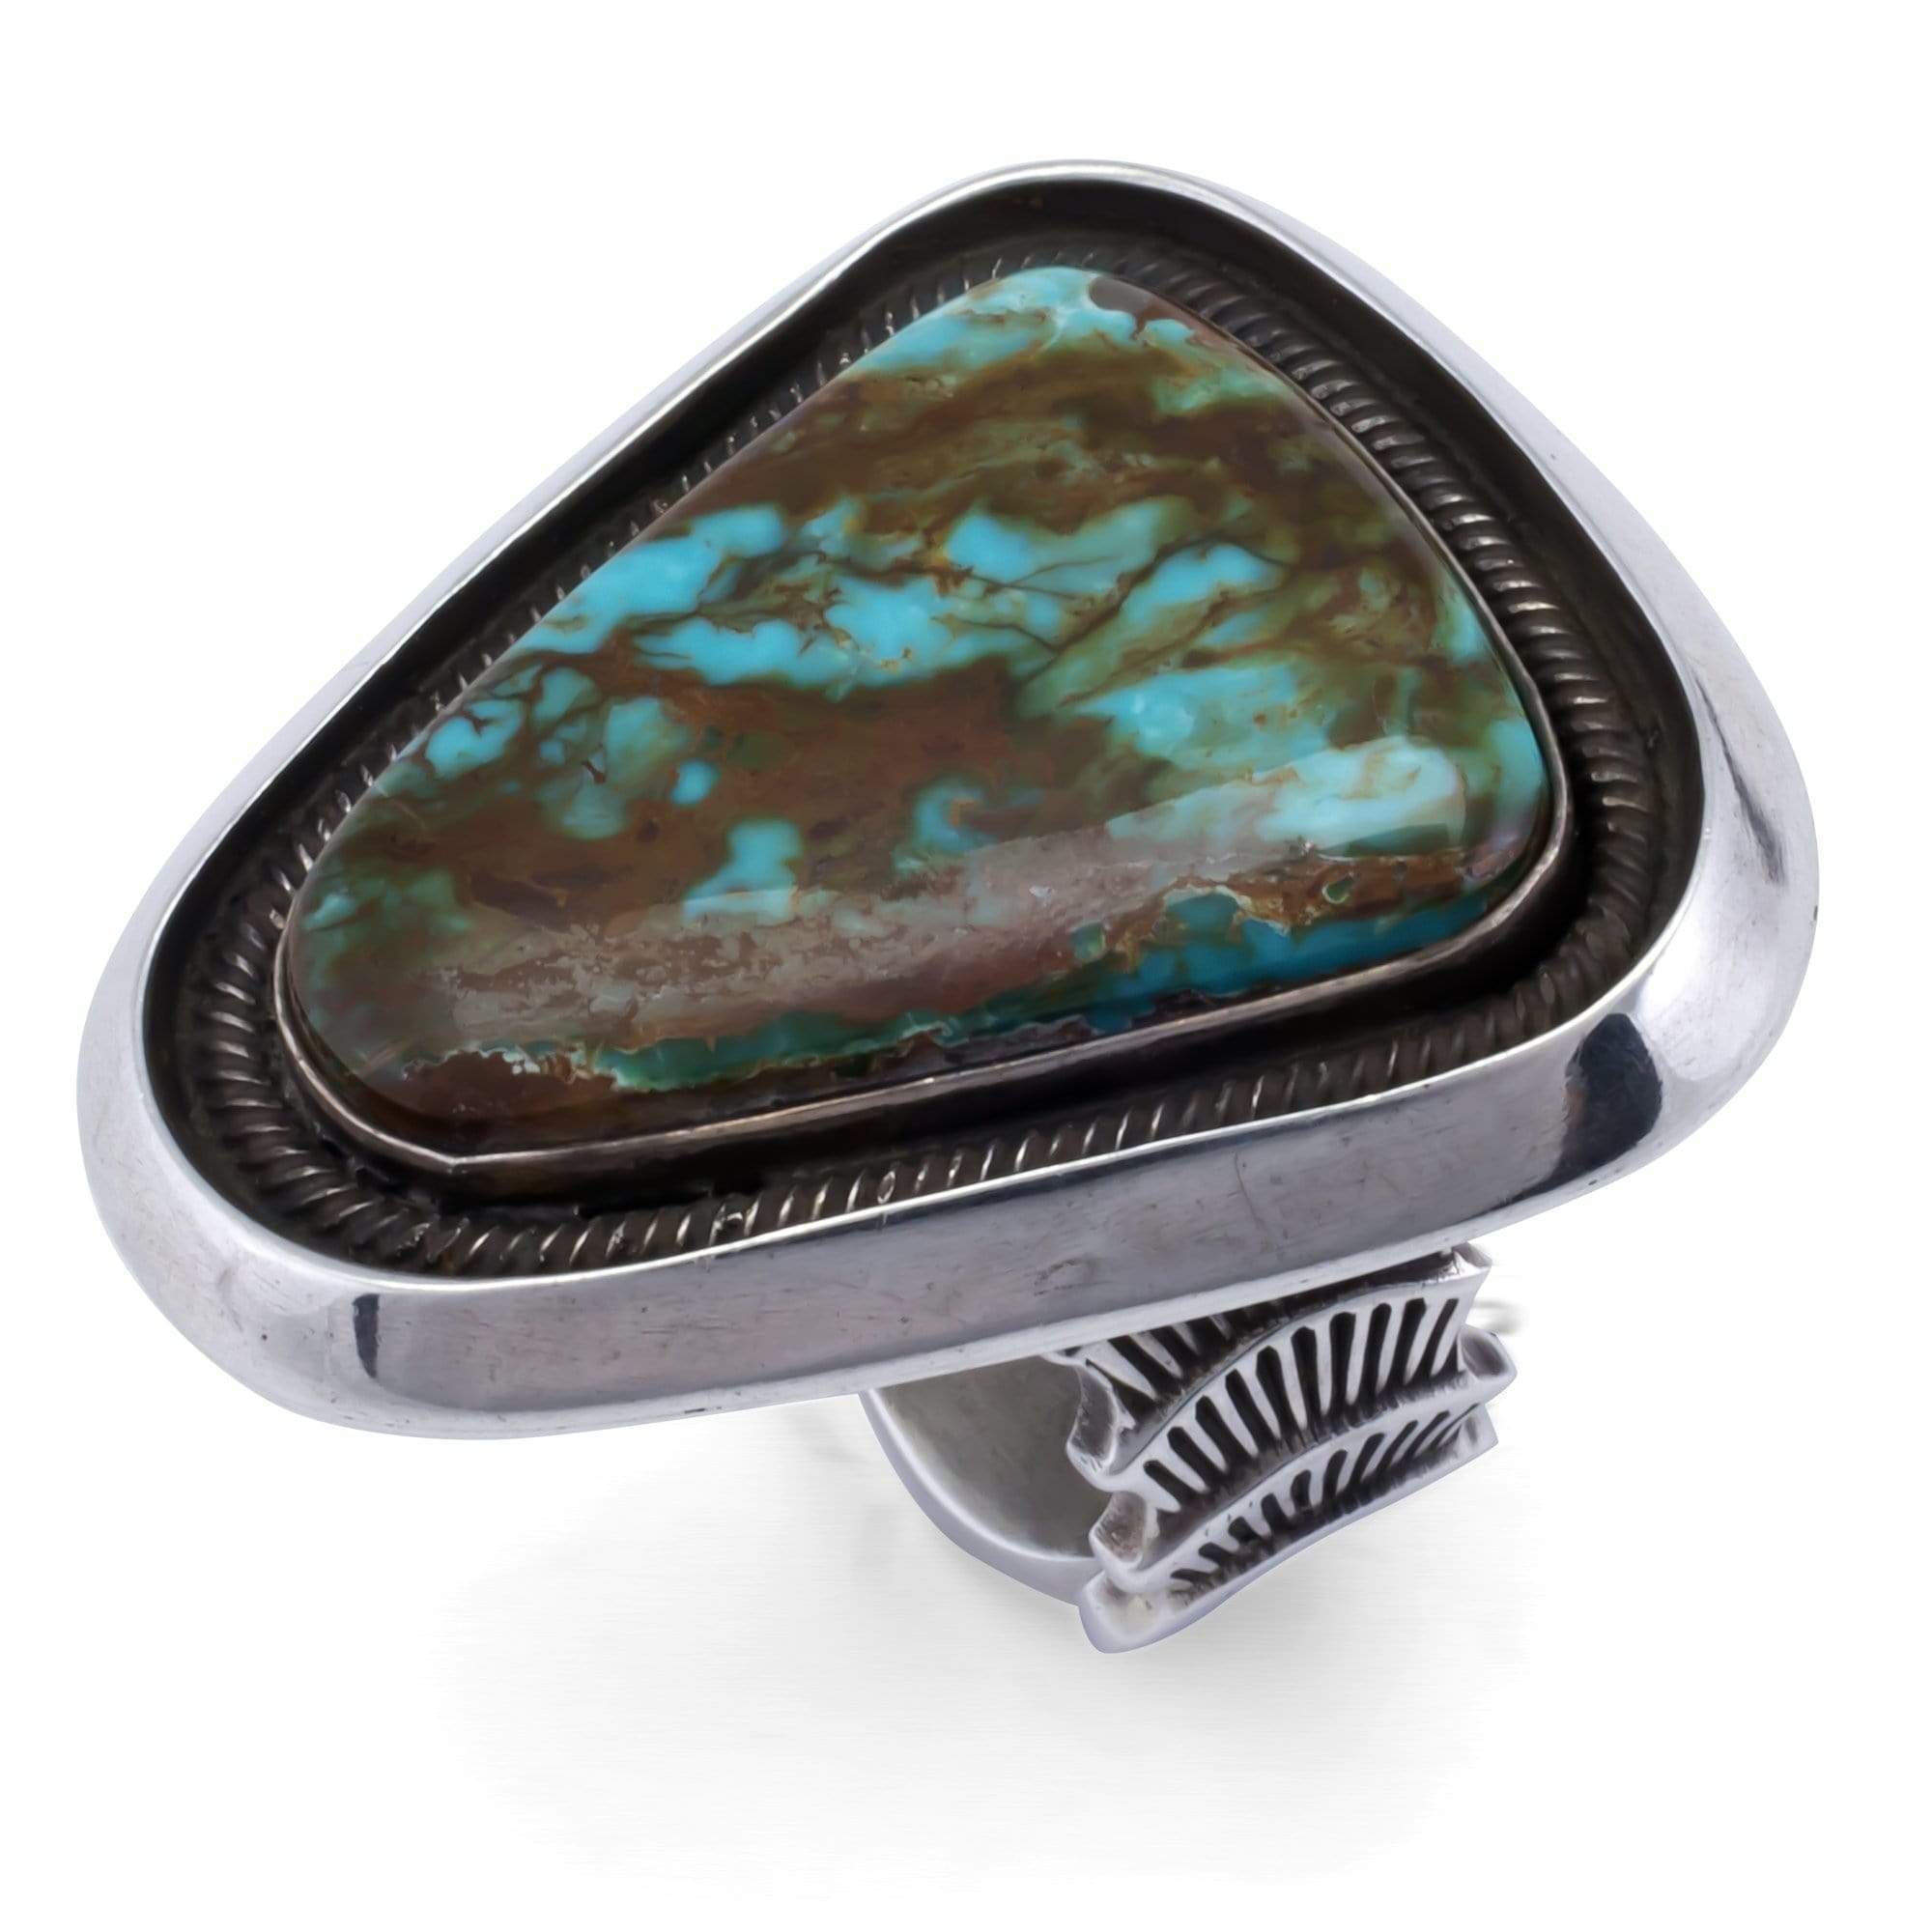 Kalifano Native American Jewelry 9 Laney Martinez Kingman Turquoise Native American Made 925 Sterling Silver Ring NAR2000.001.9